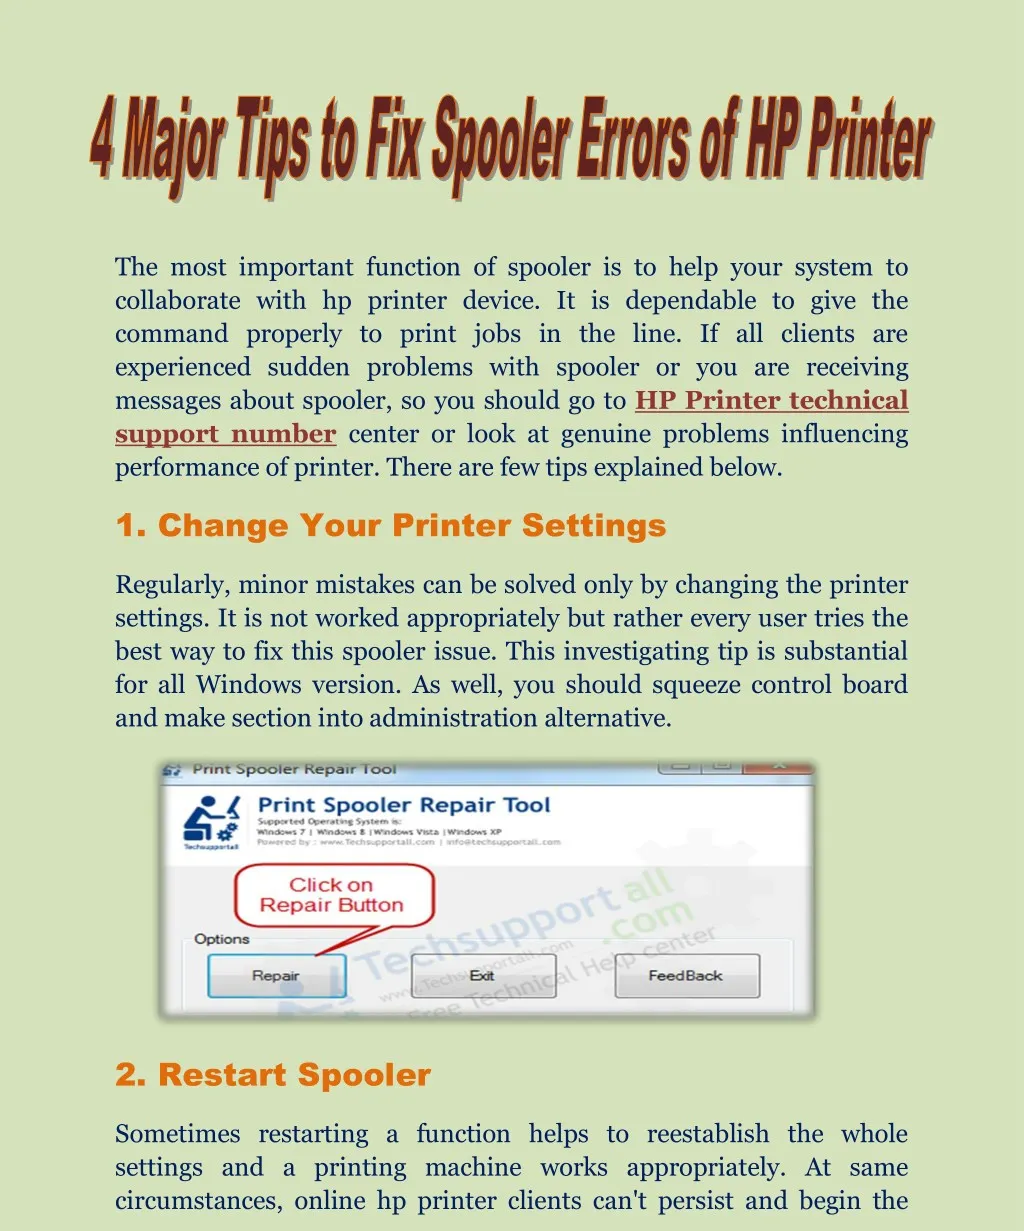 the most important function of spooler is to help